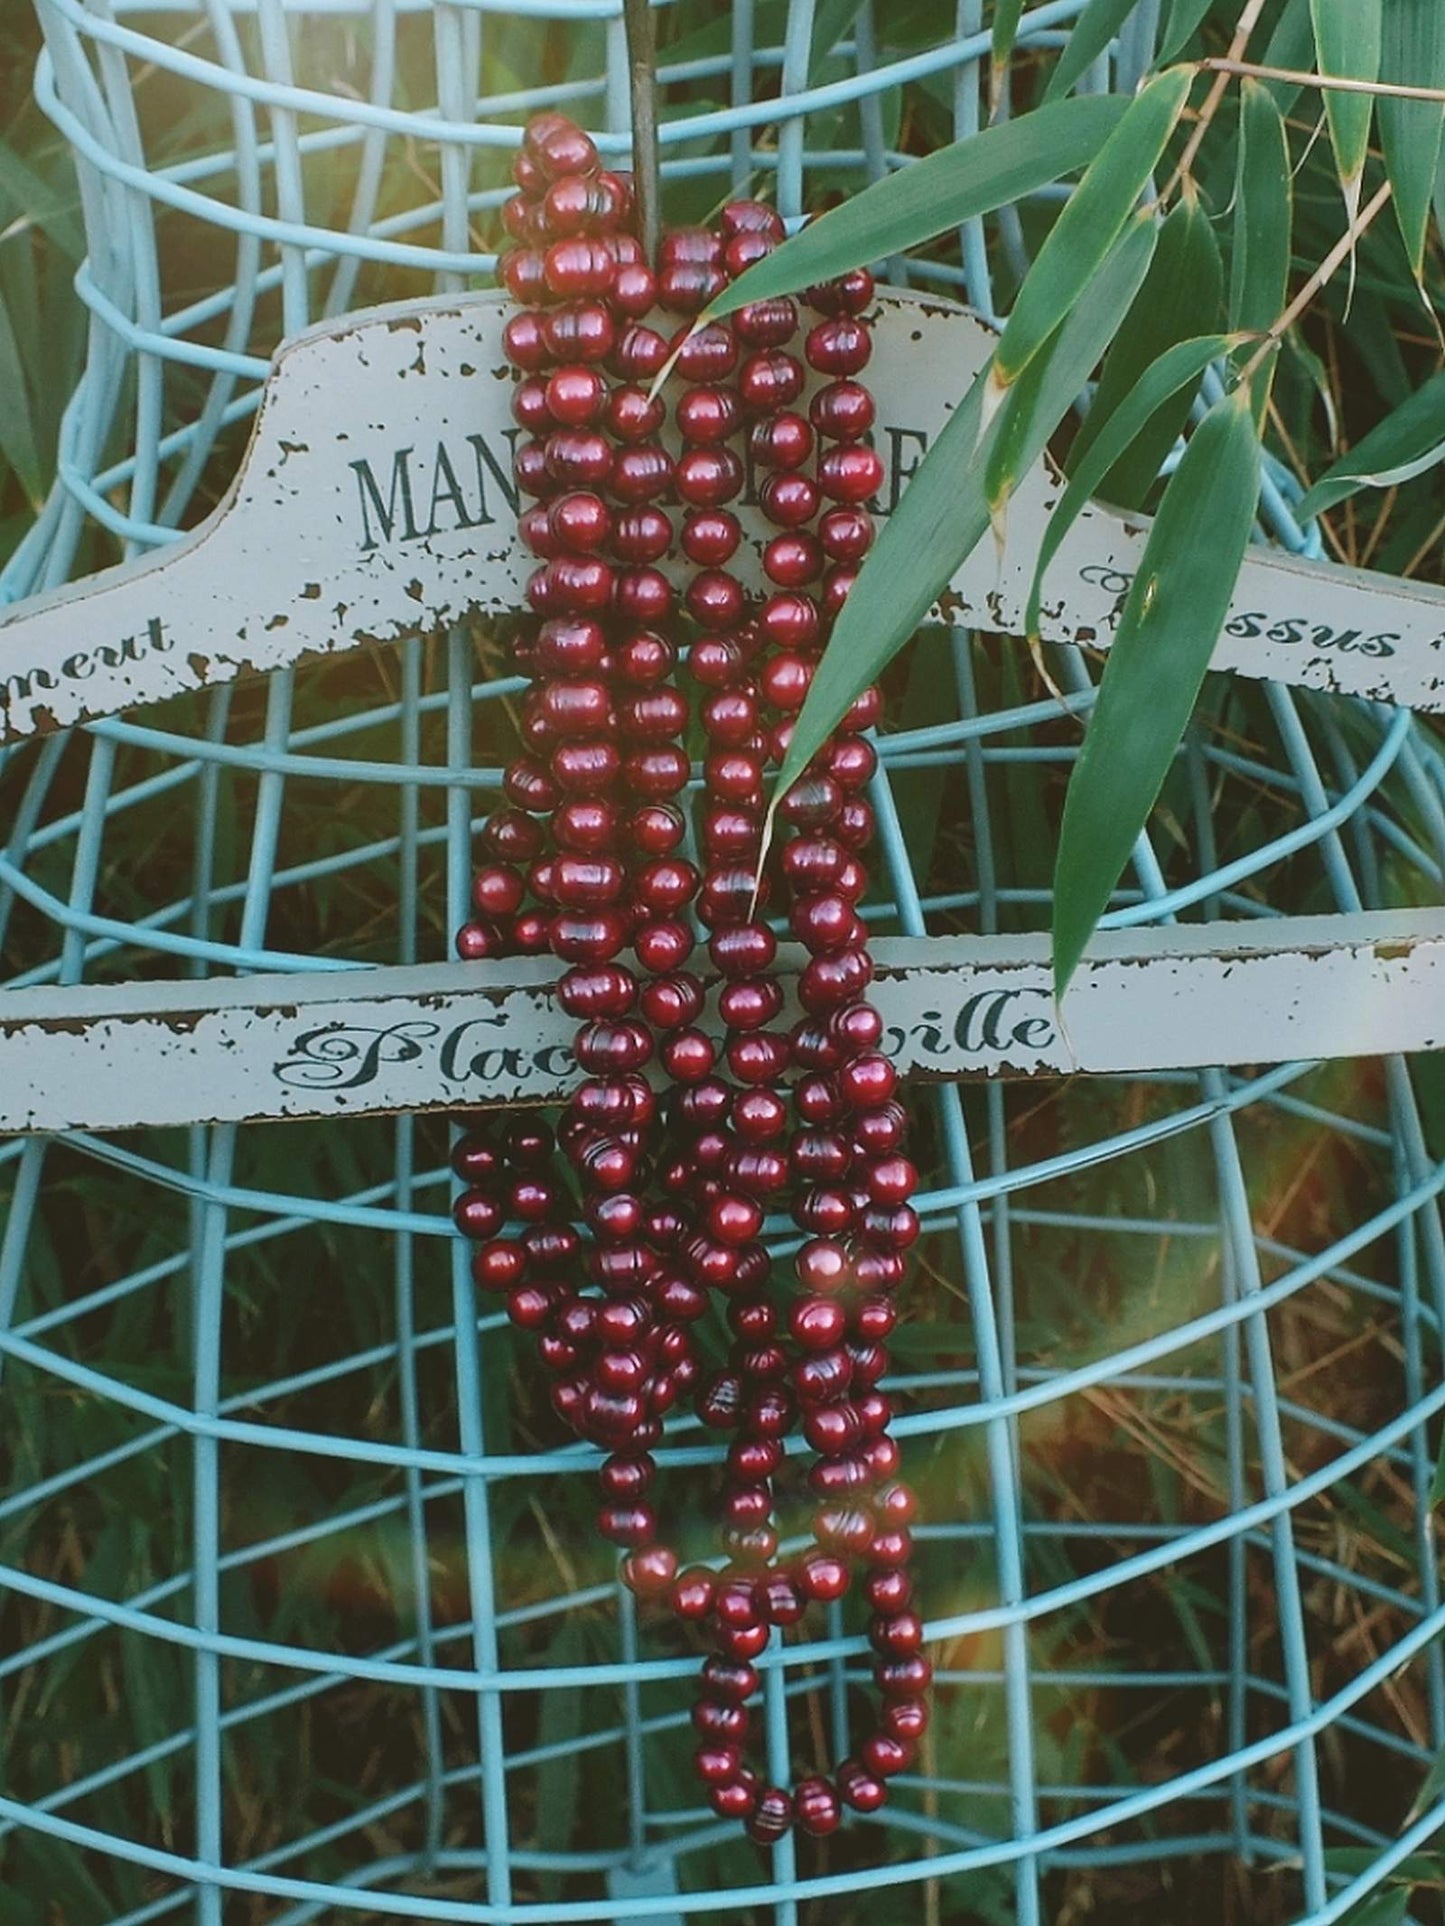 Pre-Loved Long String Of Japanese Freshwater Cranberry Pearls -  Flapper Pearl Necklace